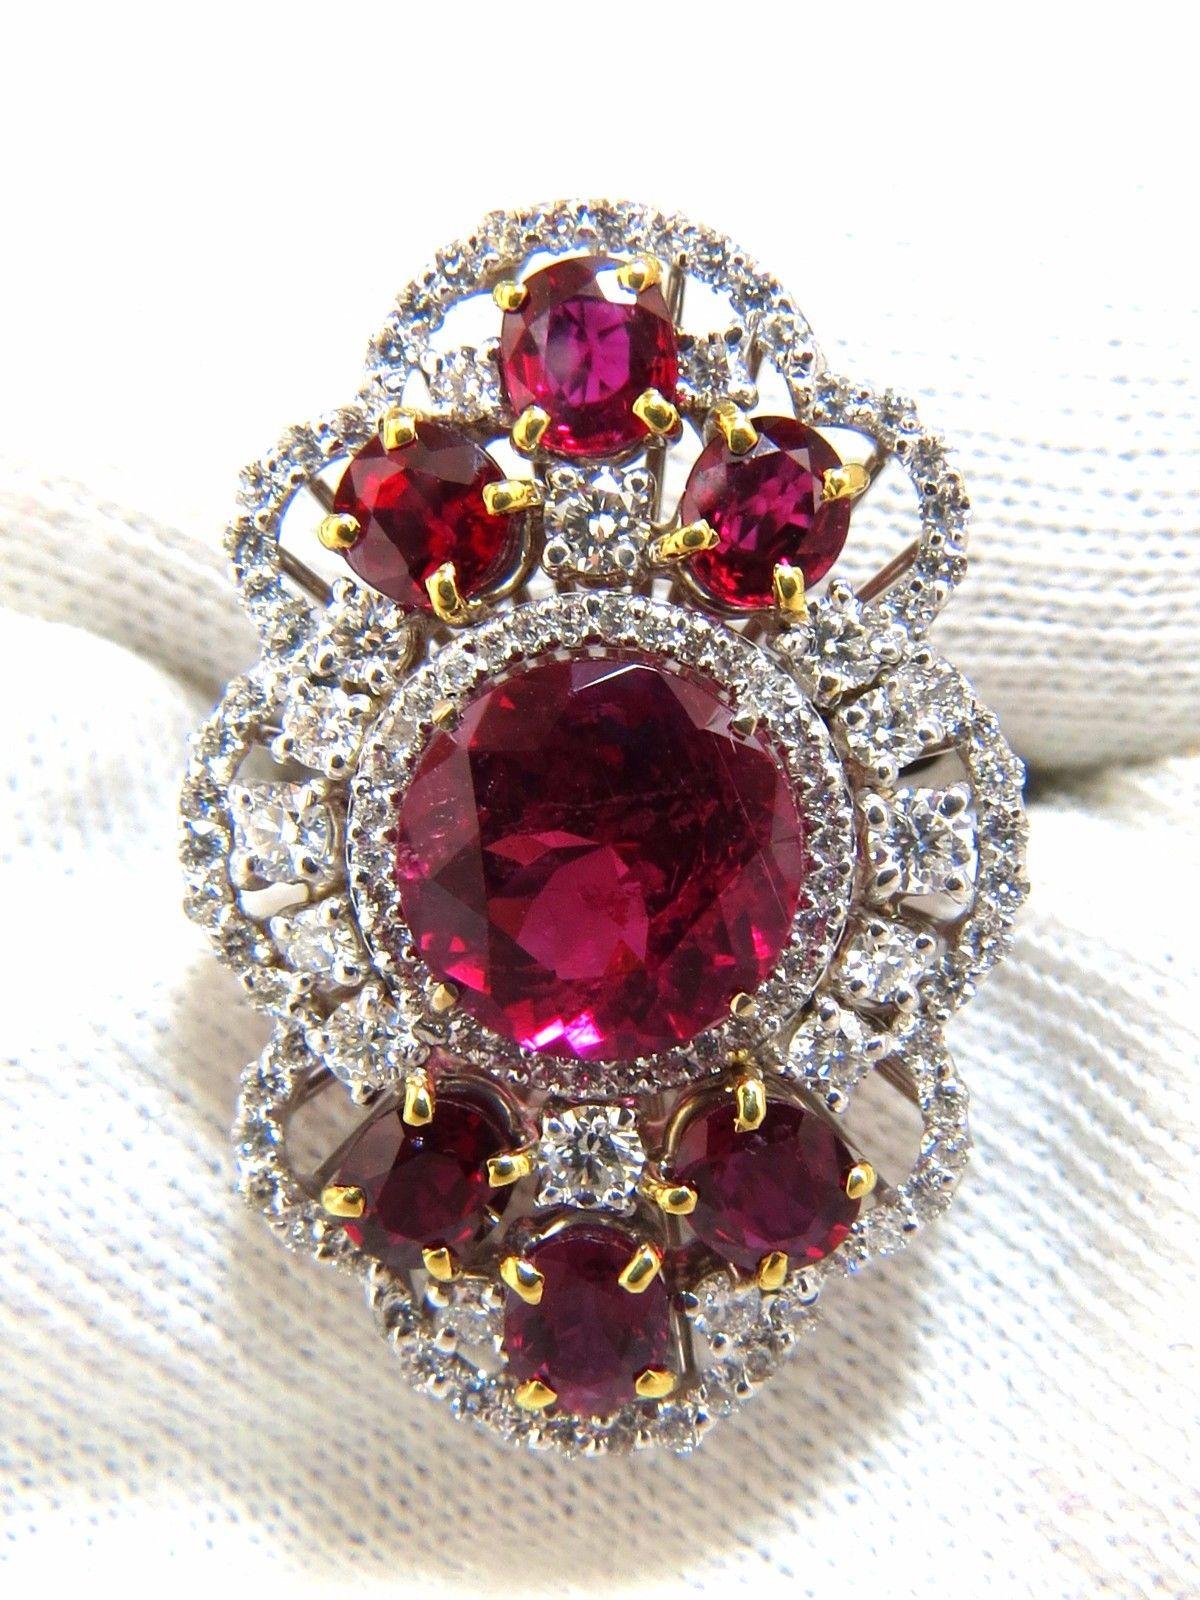 GIA Certified 8.03CT Natural Tourmaline Rubellite Ruby Diamond Cluster Ring 18K For Sale 1